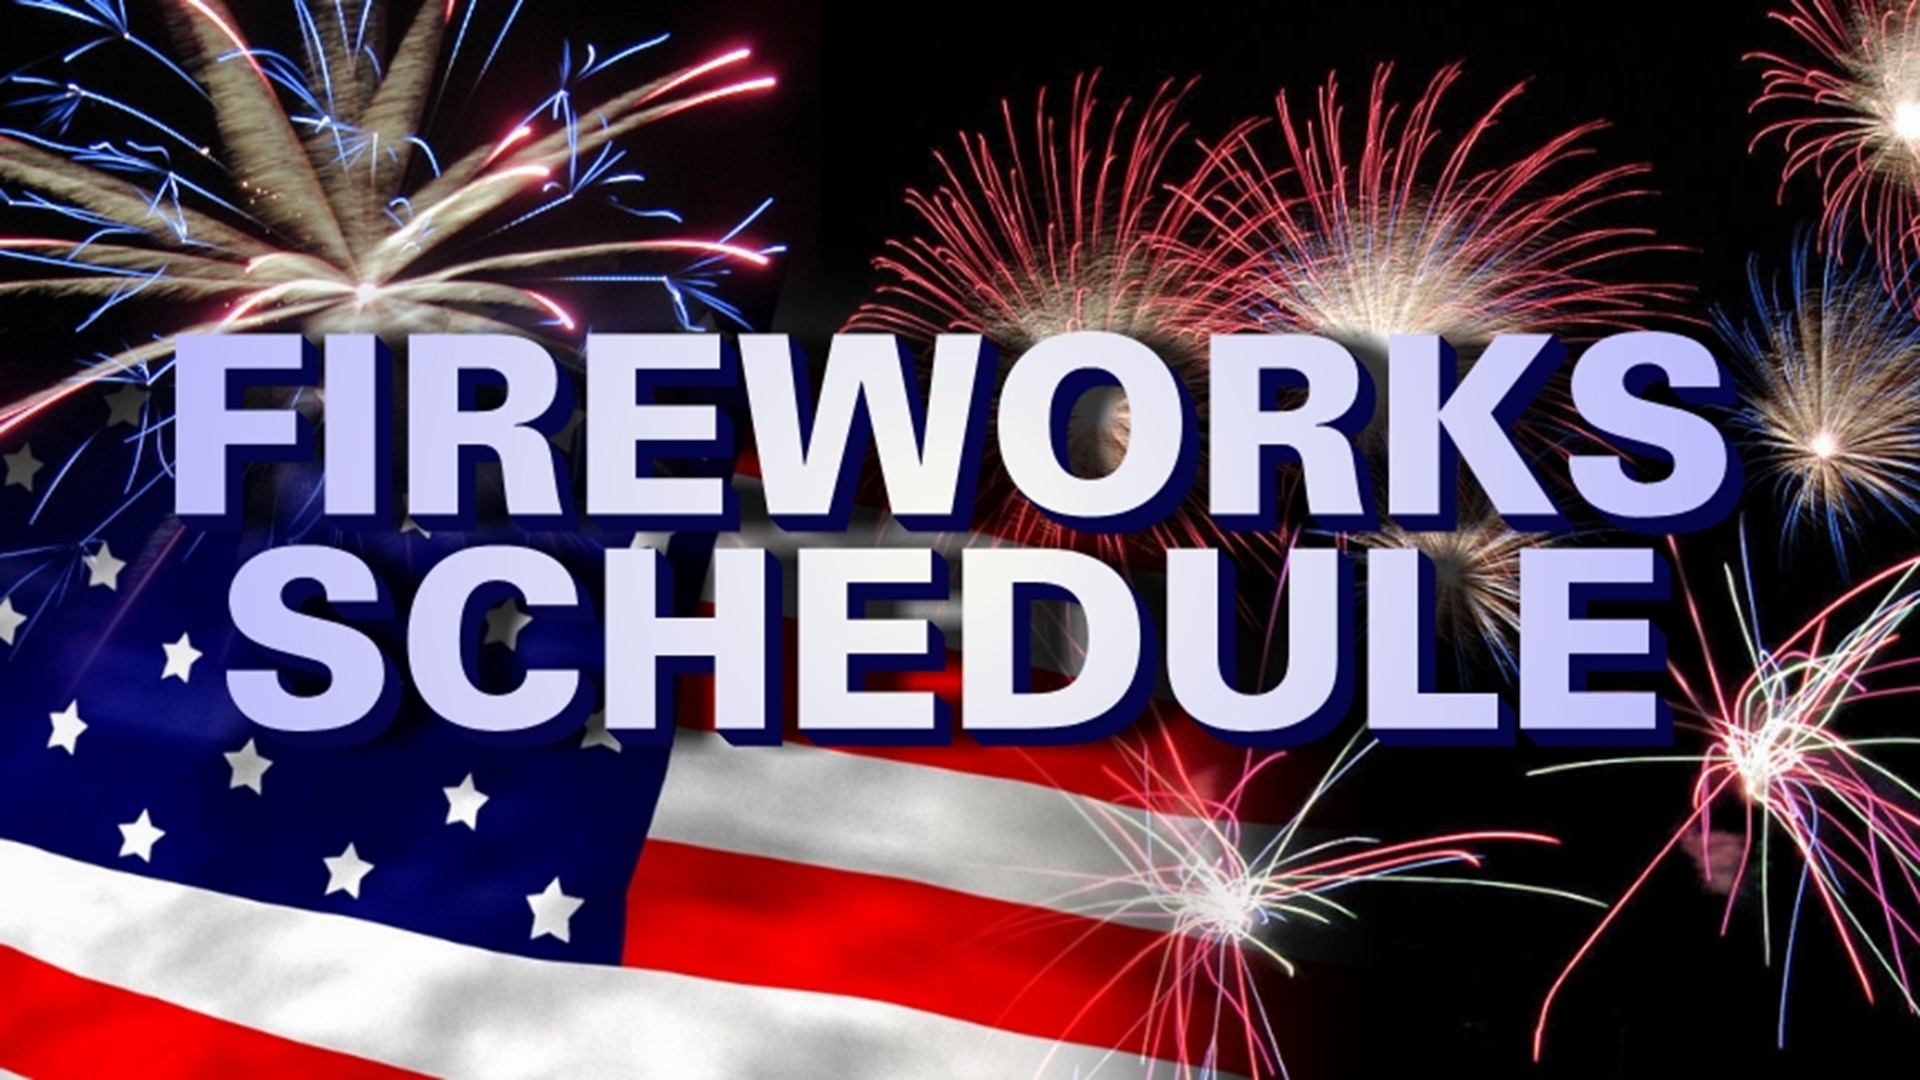 Fireworks will soon be lighting up the sky for July 4th. Don't miss a display near you!